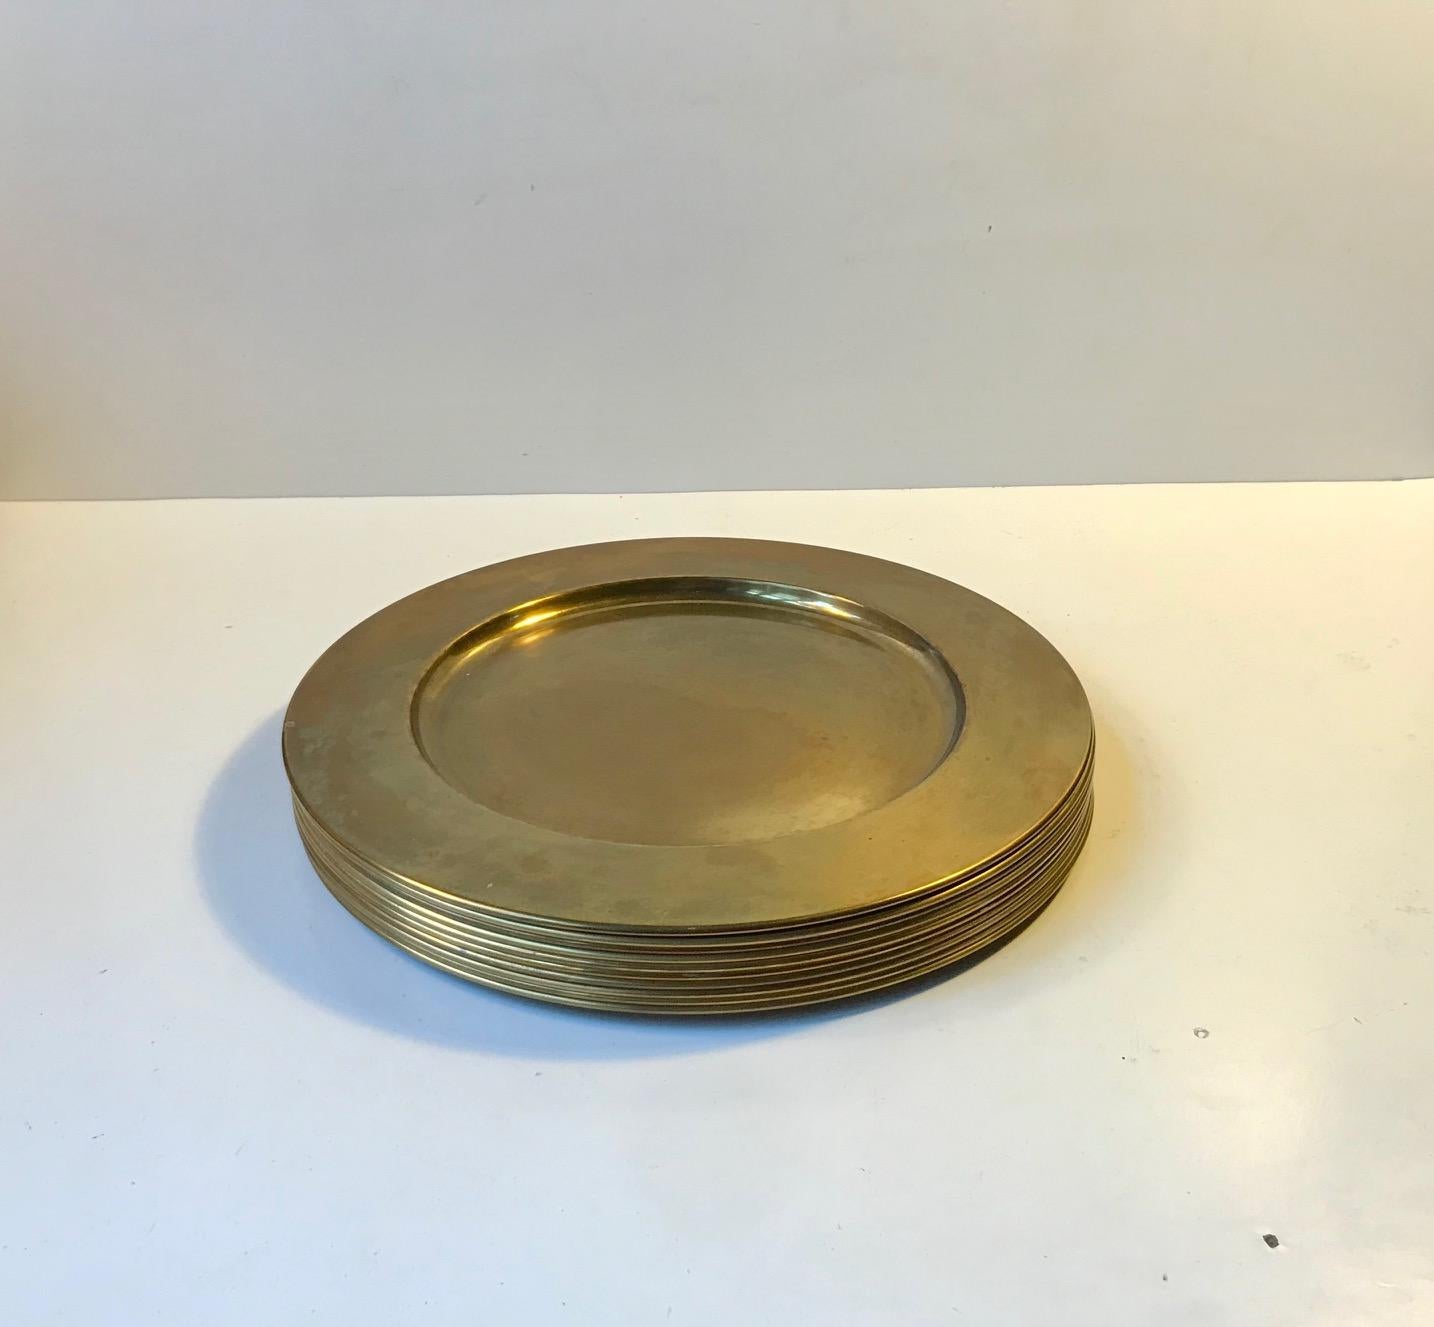 Set of 10 cover plates or dishes in solid brass. Manufactured by Stelton in Denmark during the 1960s in a style reminiscent of AJ Brass-ware. The plates are unpolished and 1 or 2 of them shows ware and patina here and there.